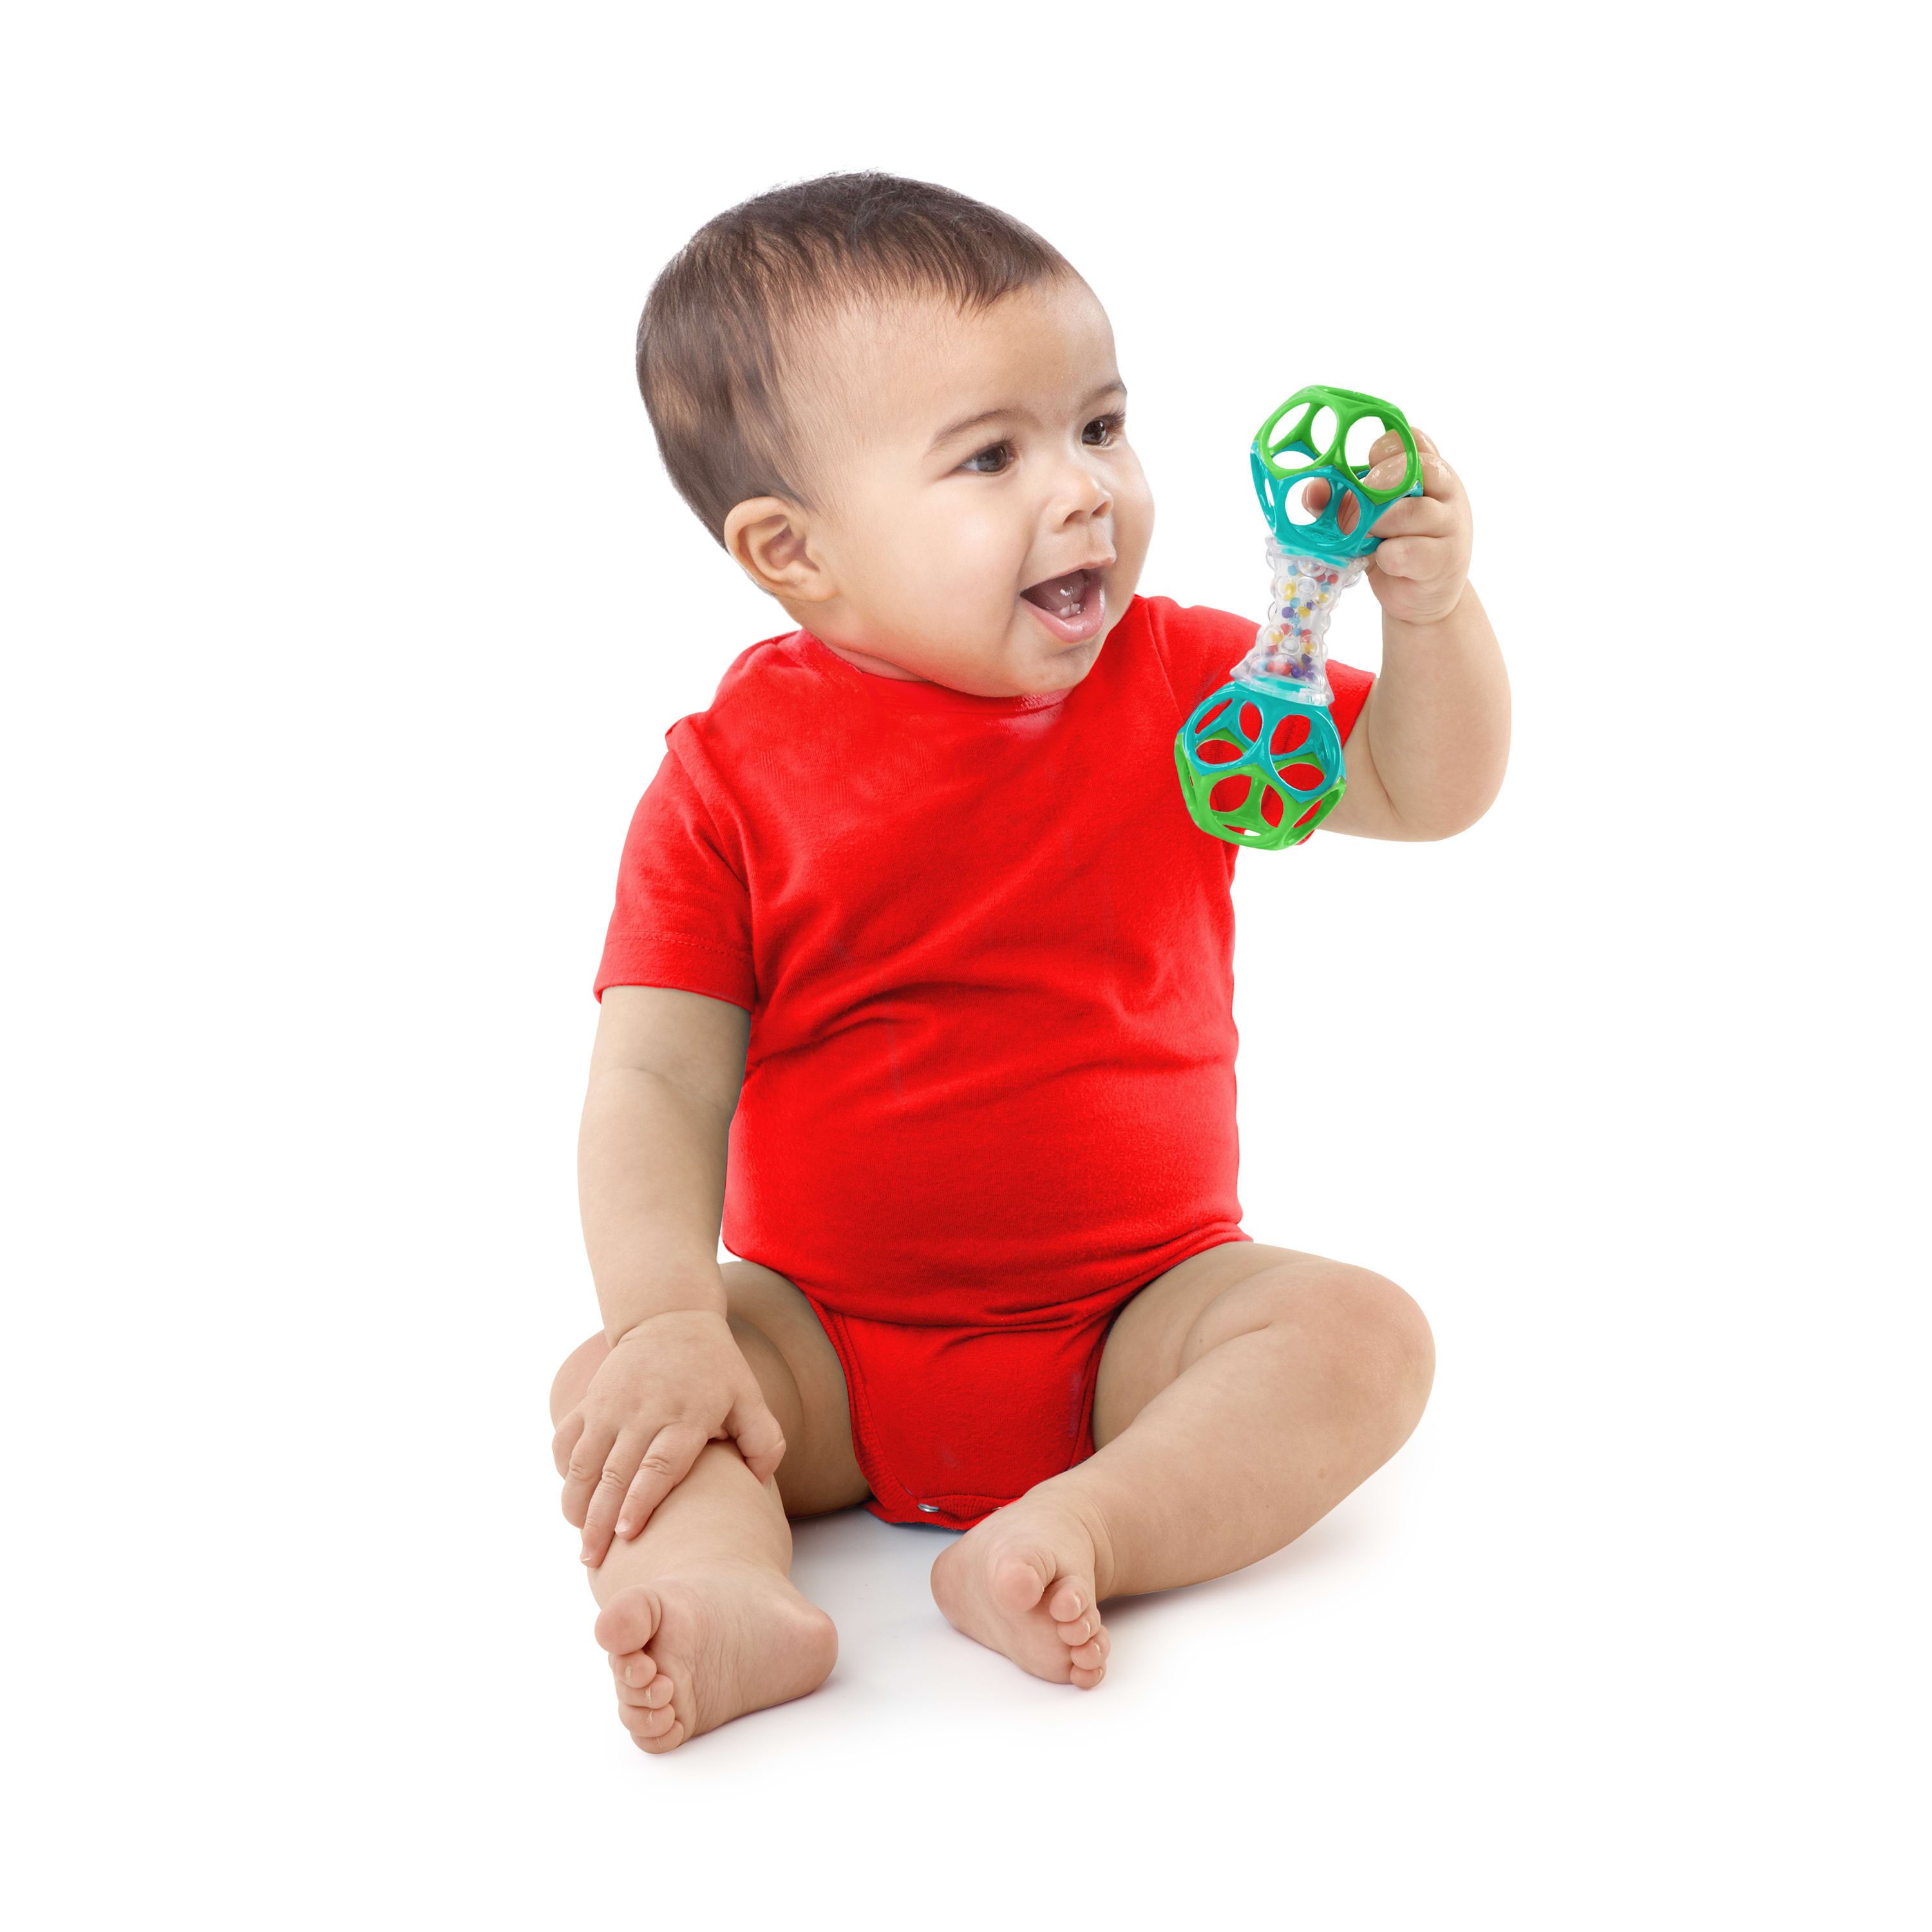 Bright Starts Oball Shaker Beats Easy Grasp Infant Baby Rattle, Blue and Green - image 3 of 4